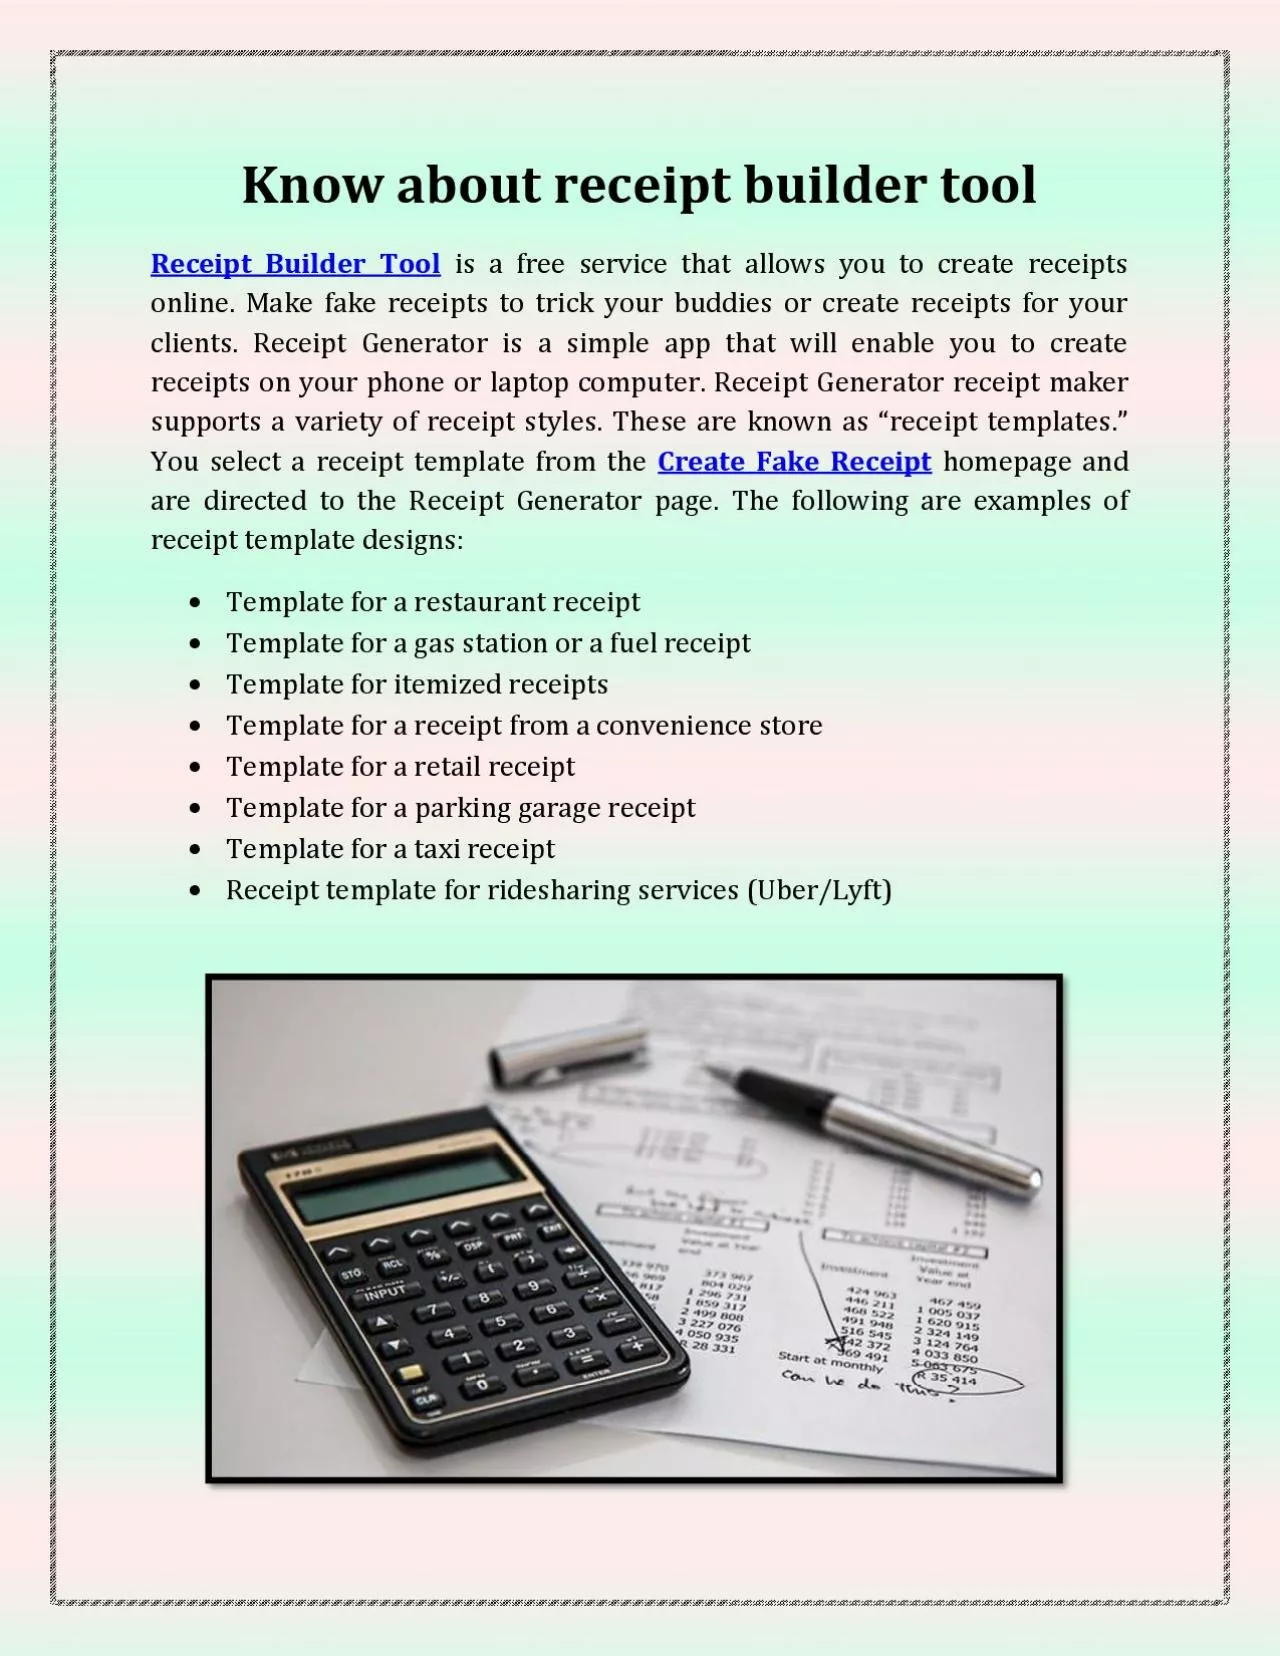 Know about receipt builder tool